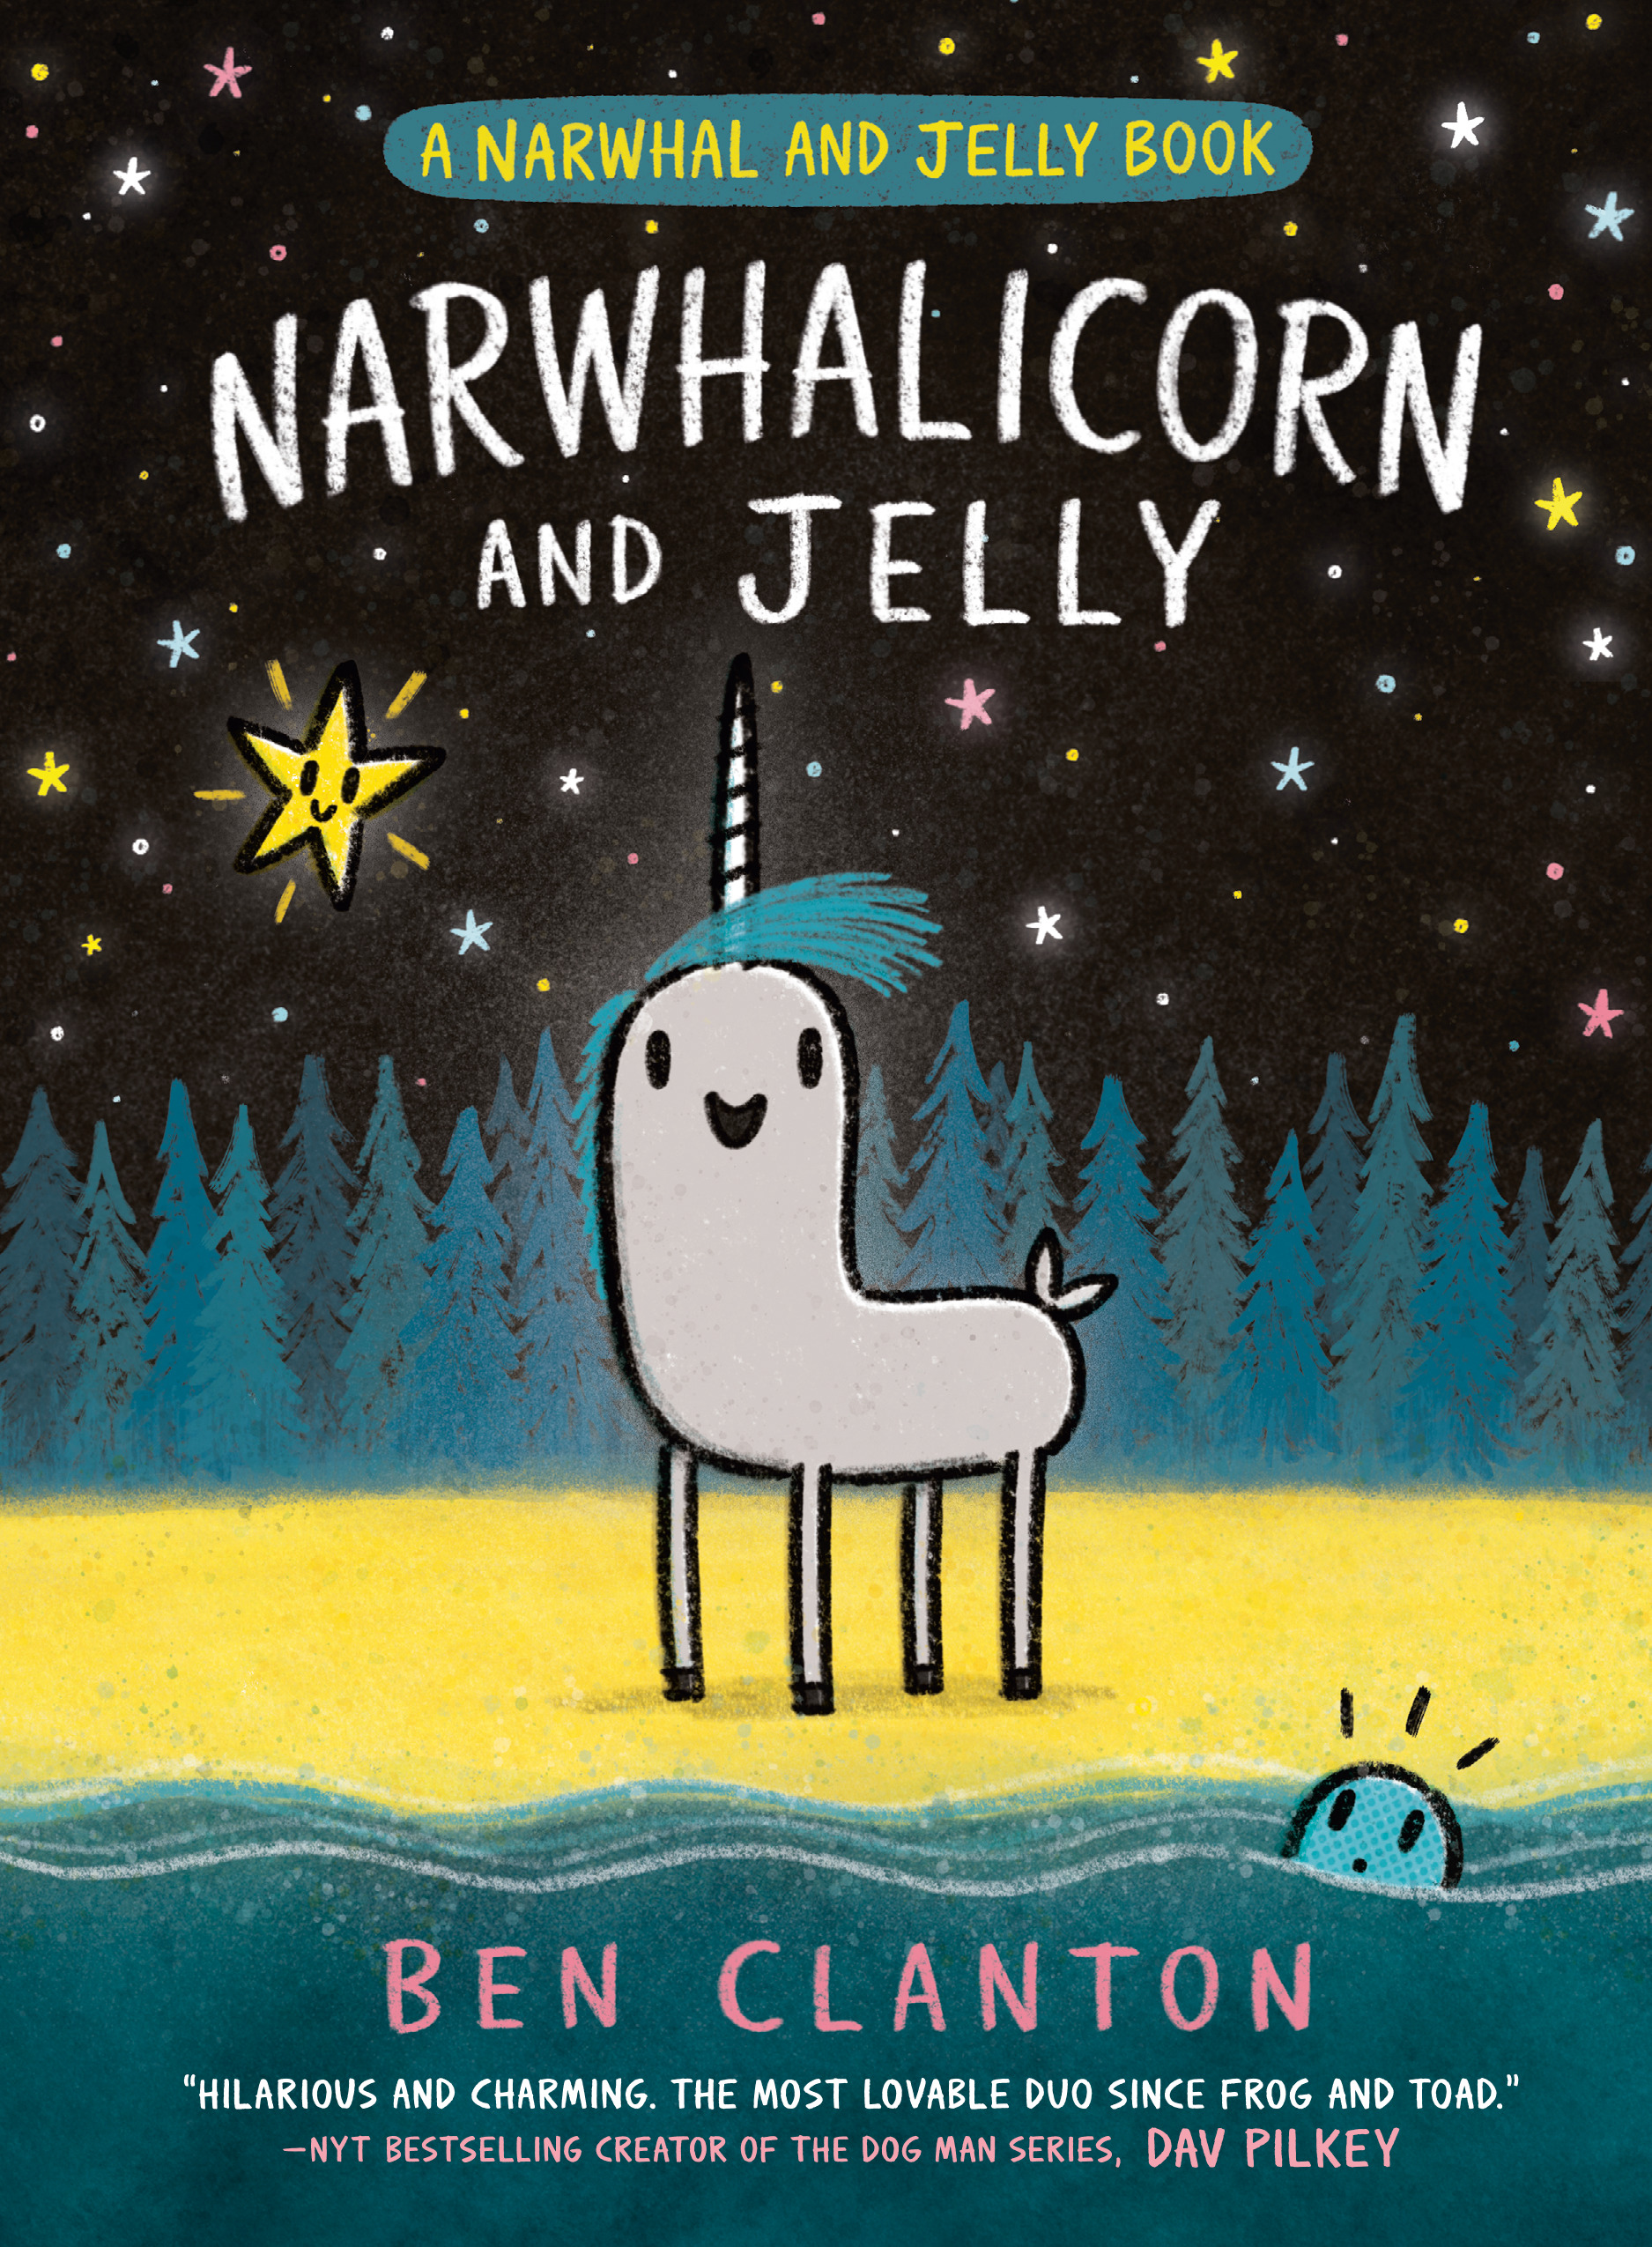 Narwhalicorn and Jelly (A Narwhal and Jelly Book #7) | Clanton, Ben